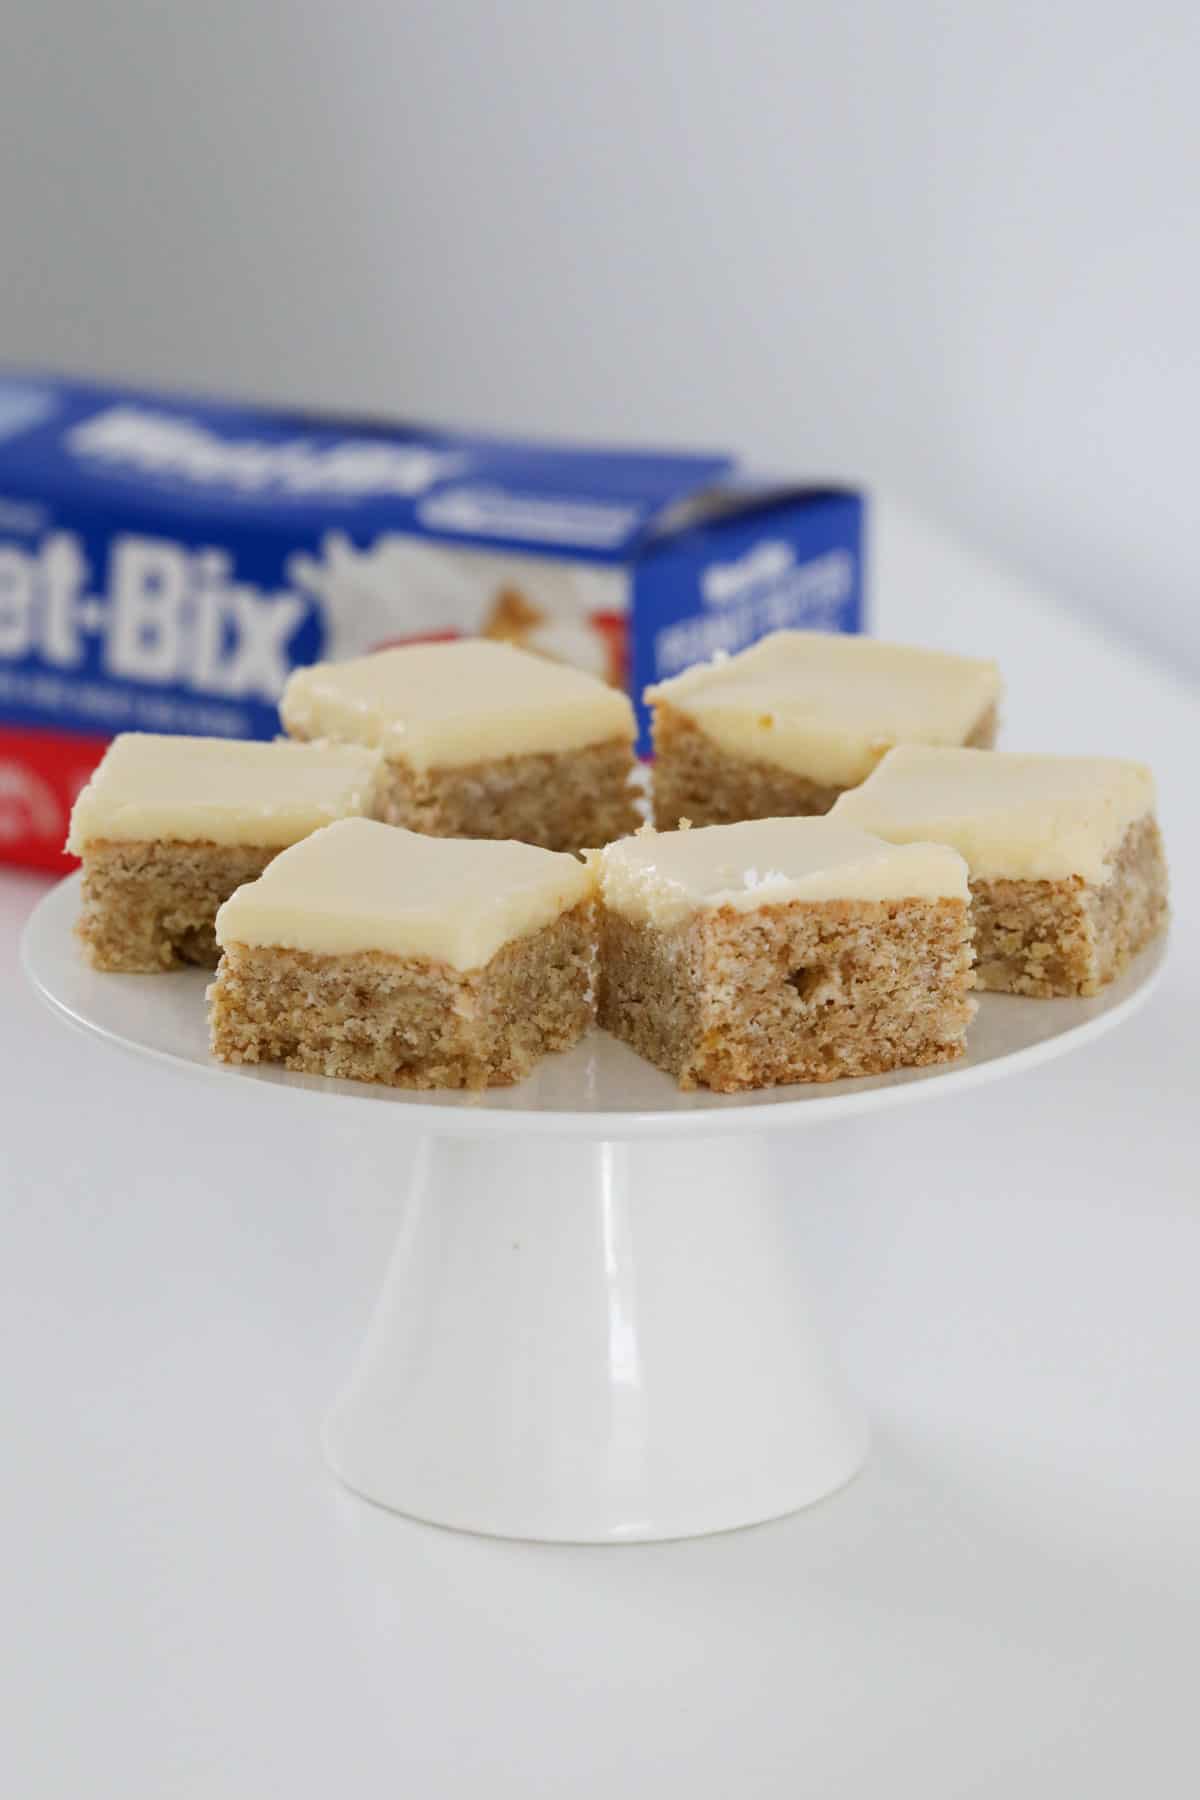 A cake stand with squares of lemon slice on it, in front of a box of Weet-Bix.